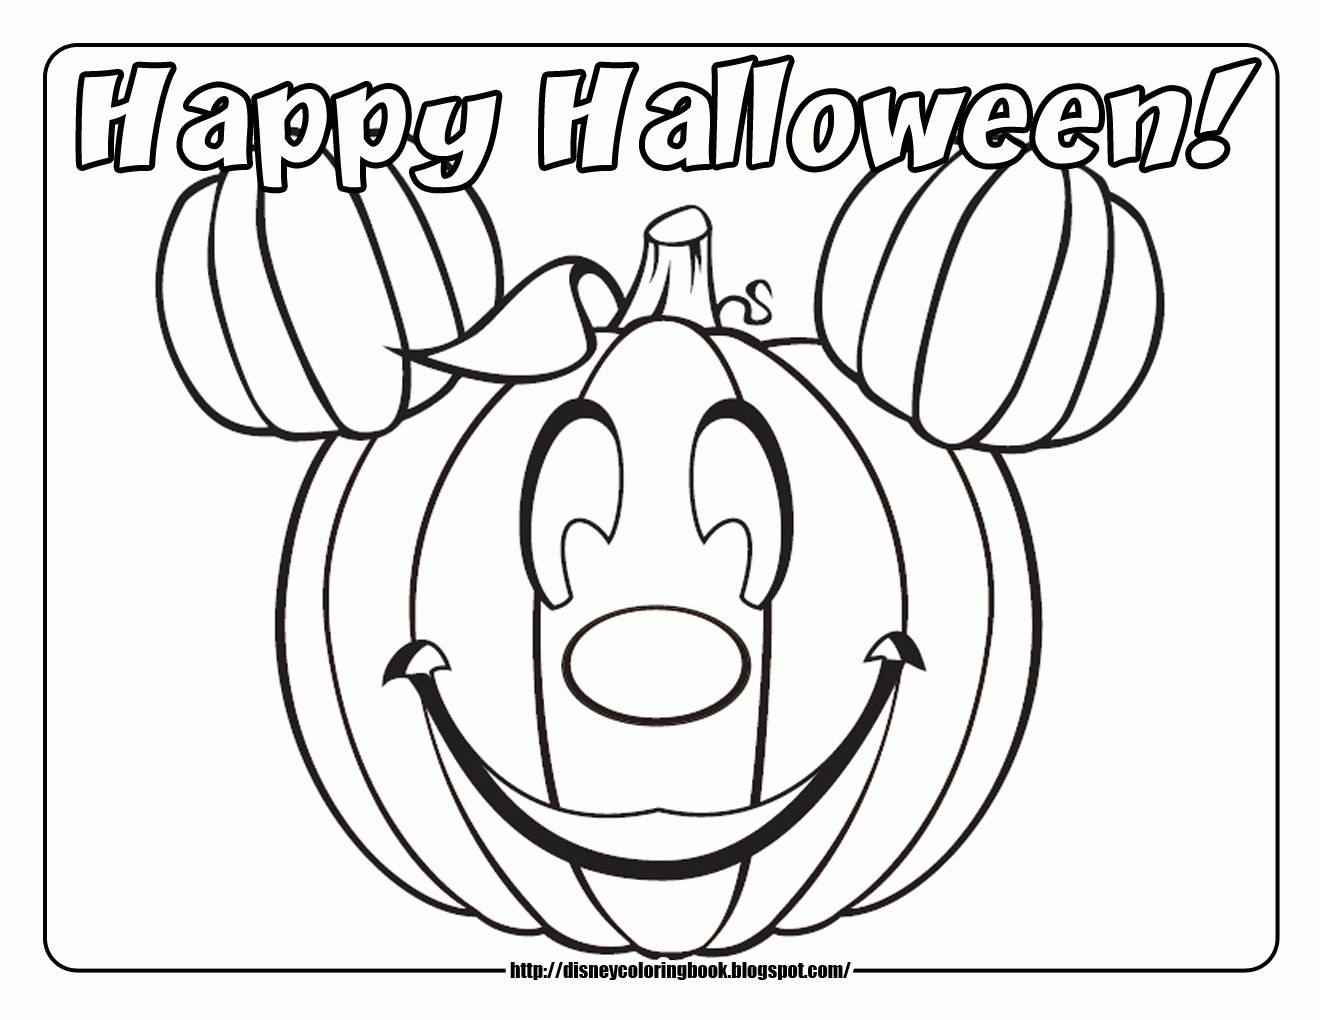 Happy Halloween Coloring Sheets   Coloring Online   Coloring Home